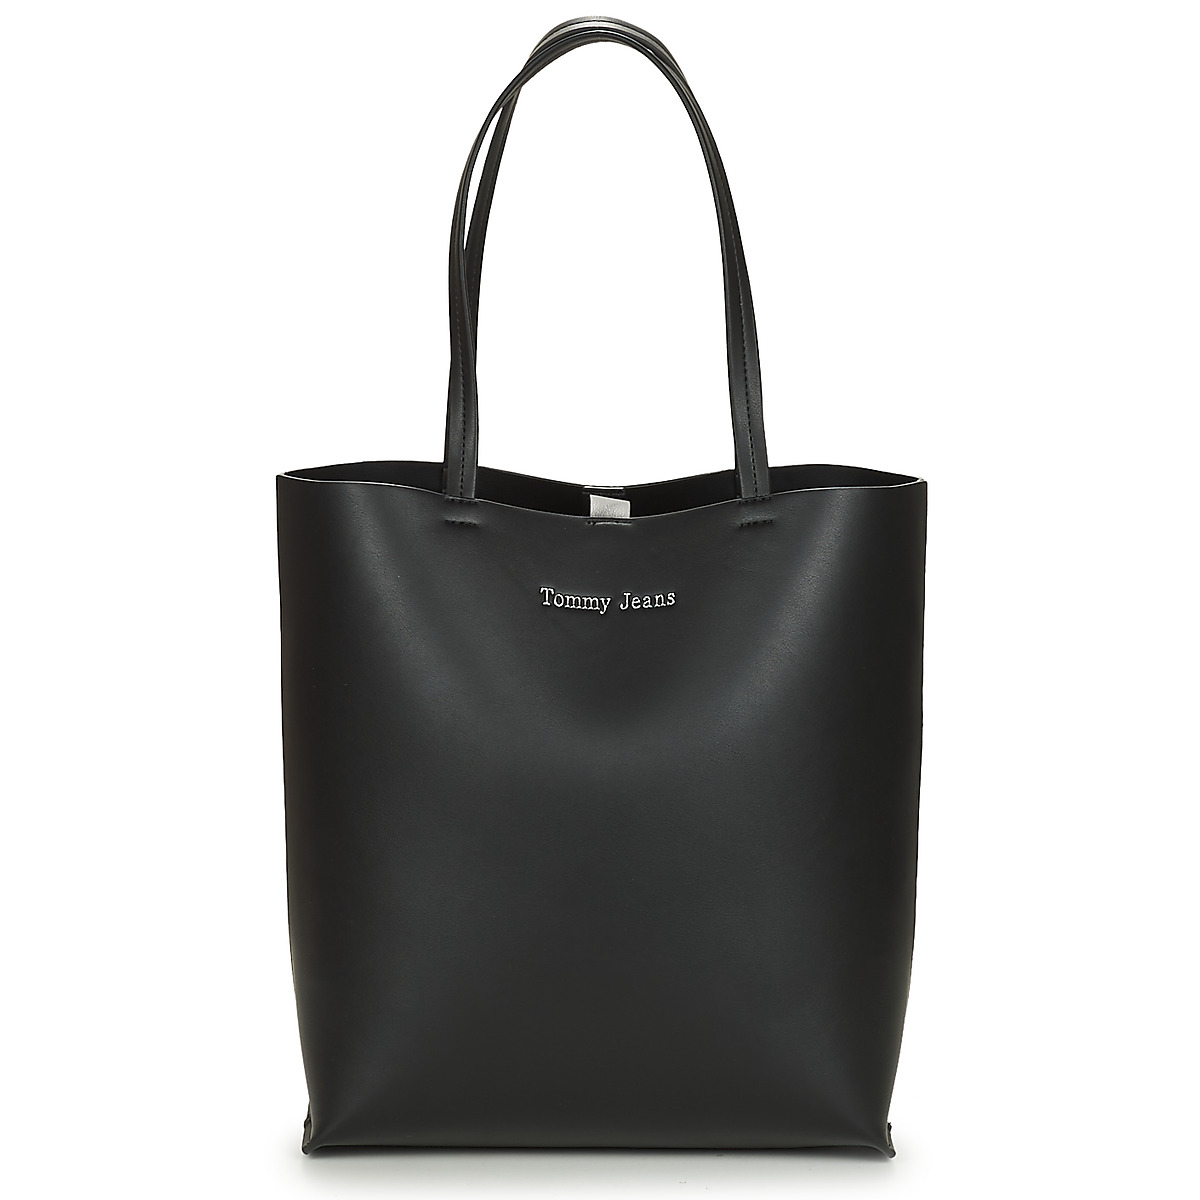 Malas Mulher Cabas / Sac shopping Tommy Jeans TJW Must North South Tote Preto